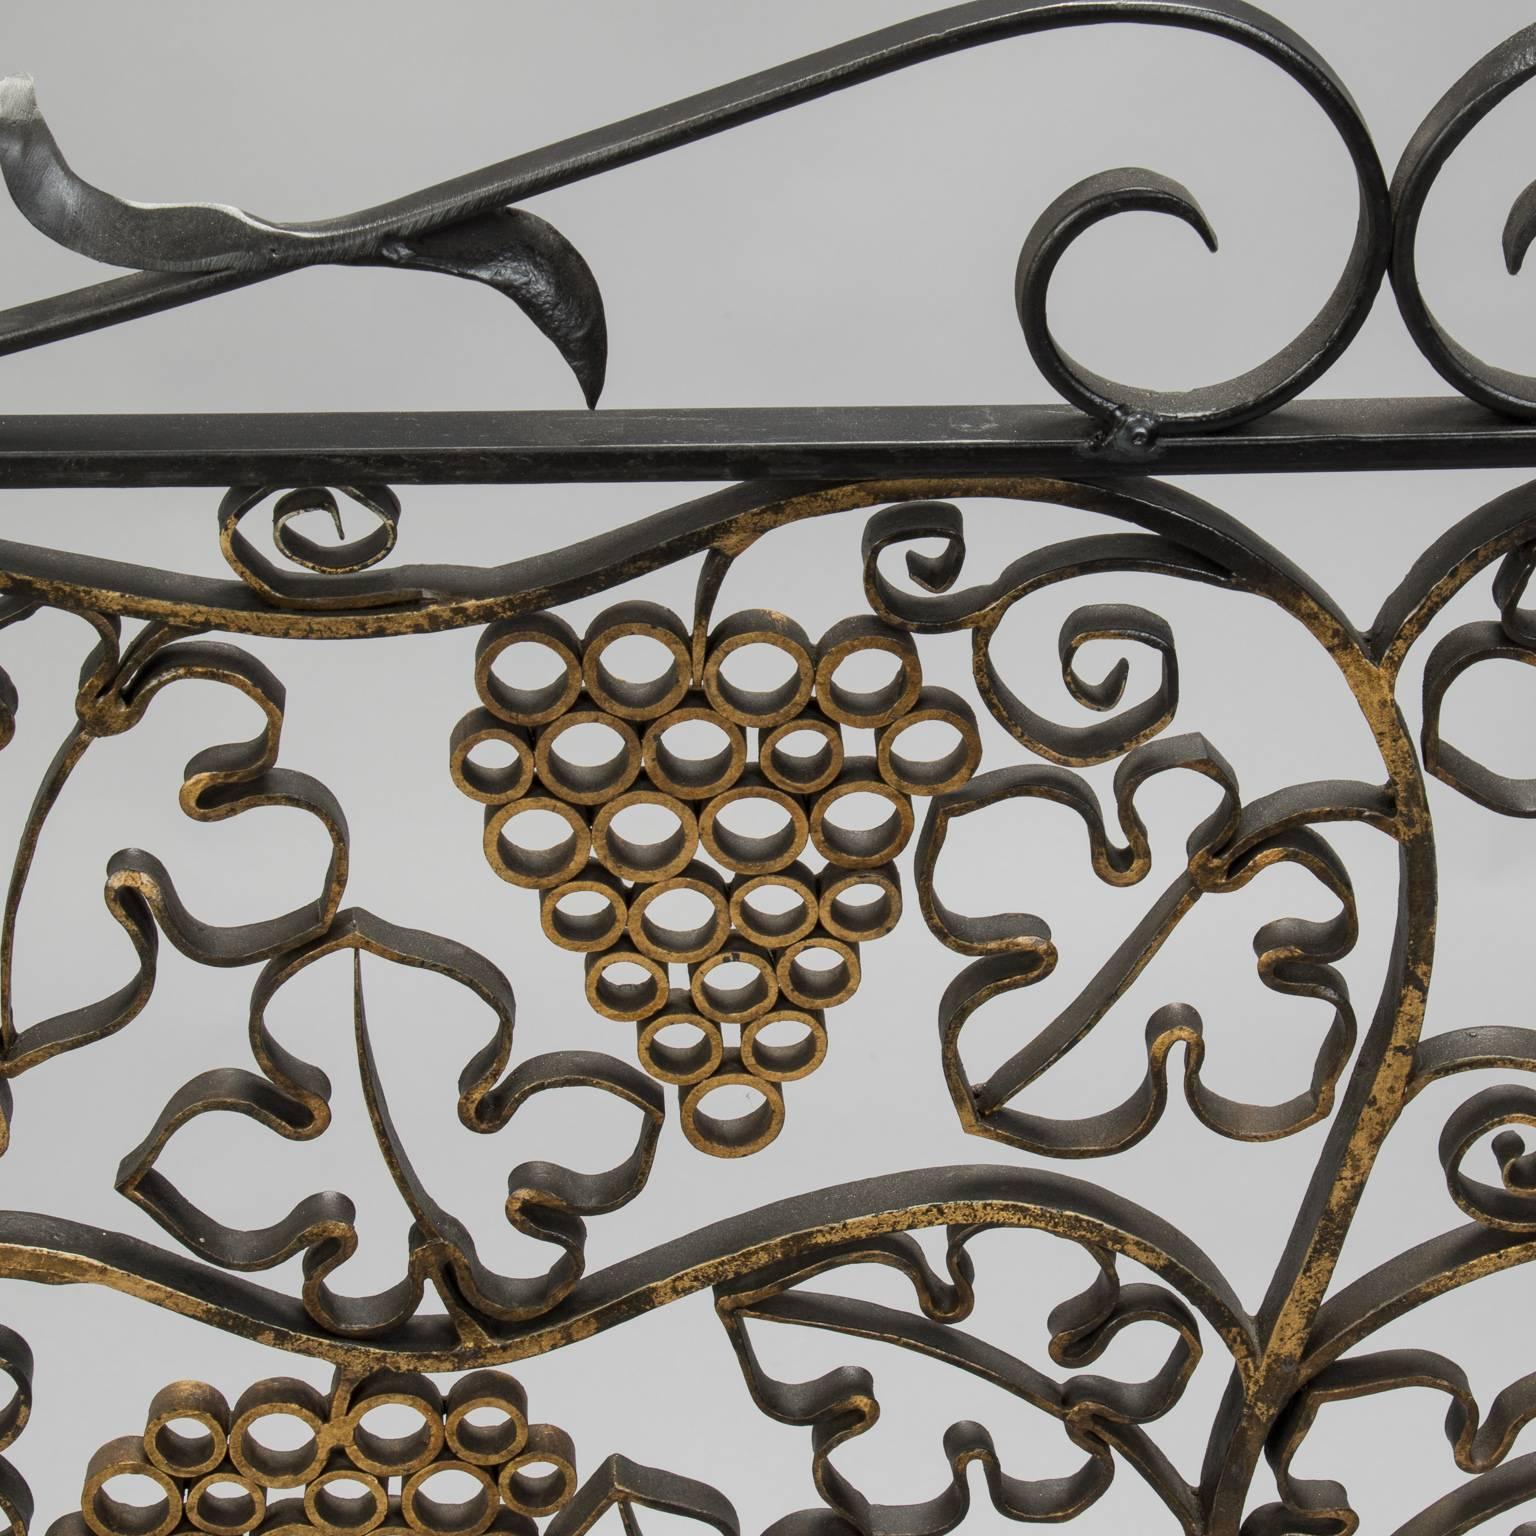 Custom fireplace screen made from circa 1930s decorative French iron grill featuring an urn with grape vines and fruit. Stand alone screen has black iron feet and decorative scroll work at the sides and crest. Beautiful, one-of-a-kind piece.